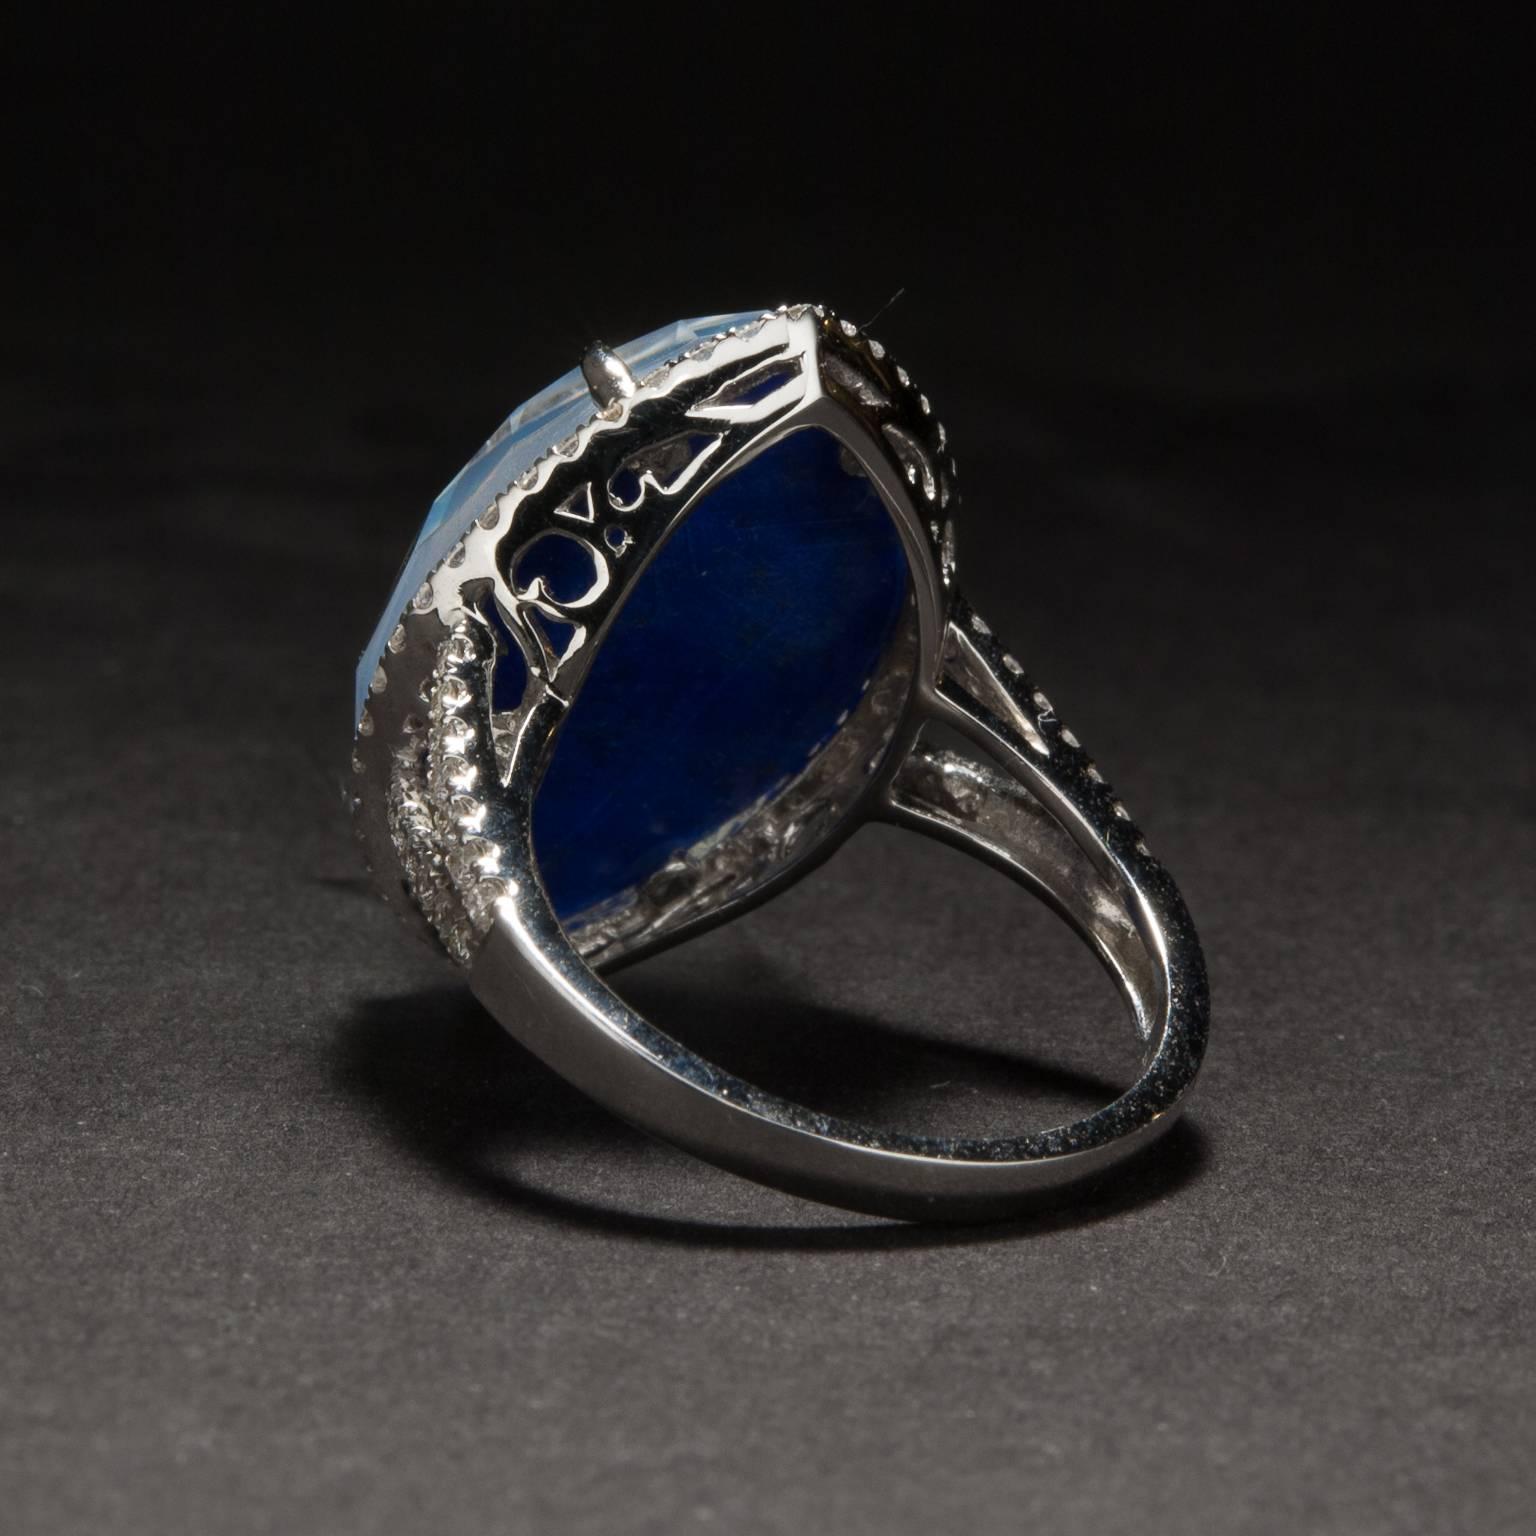 Women's Lapis Lazuli, Mother-of-Pearl and White Topaz Triplet Ring